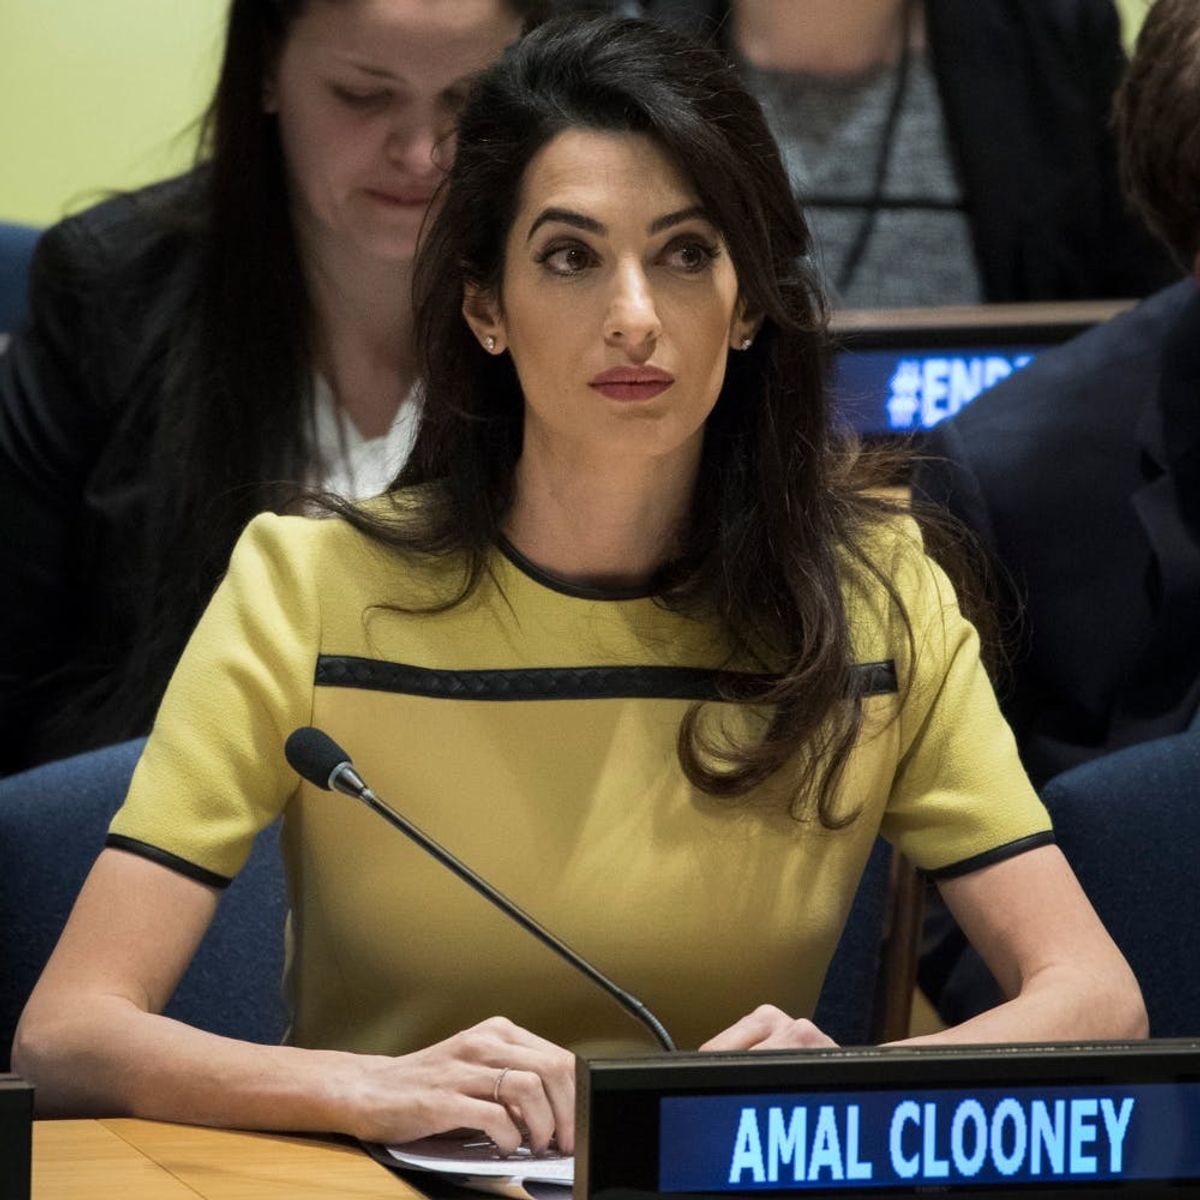 TIME’s Tweet About Amal Clooney’s Baby Bump Has People Seriously Upset